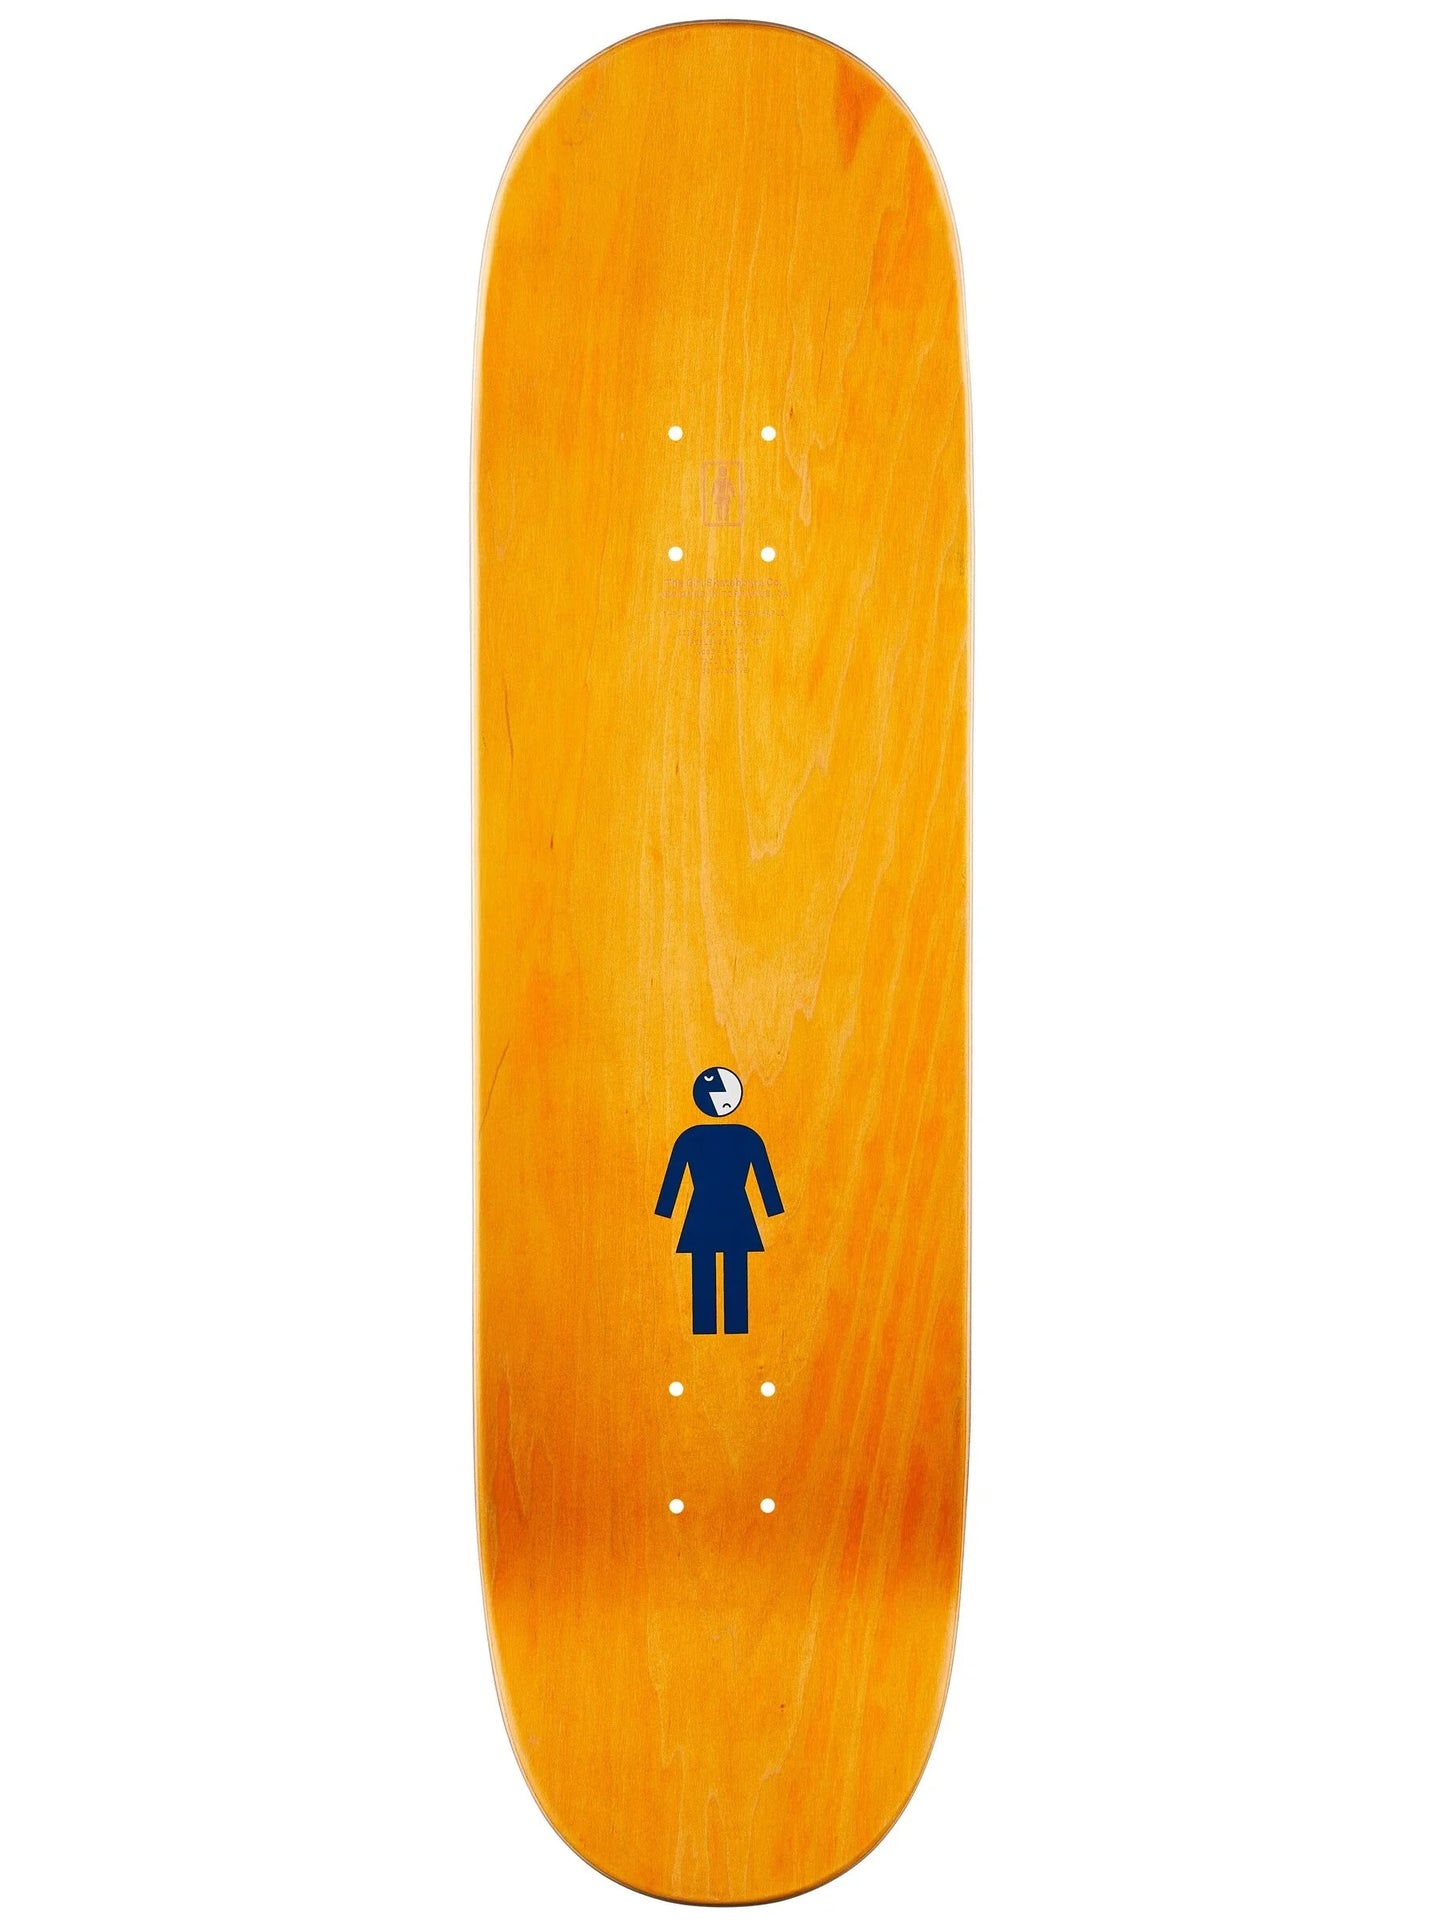 GIRL Brophy The Dialogue Deck 8.25"